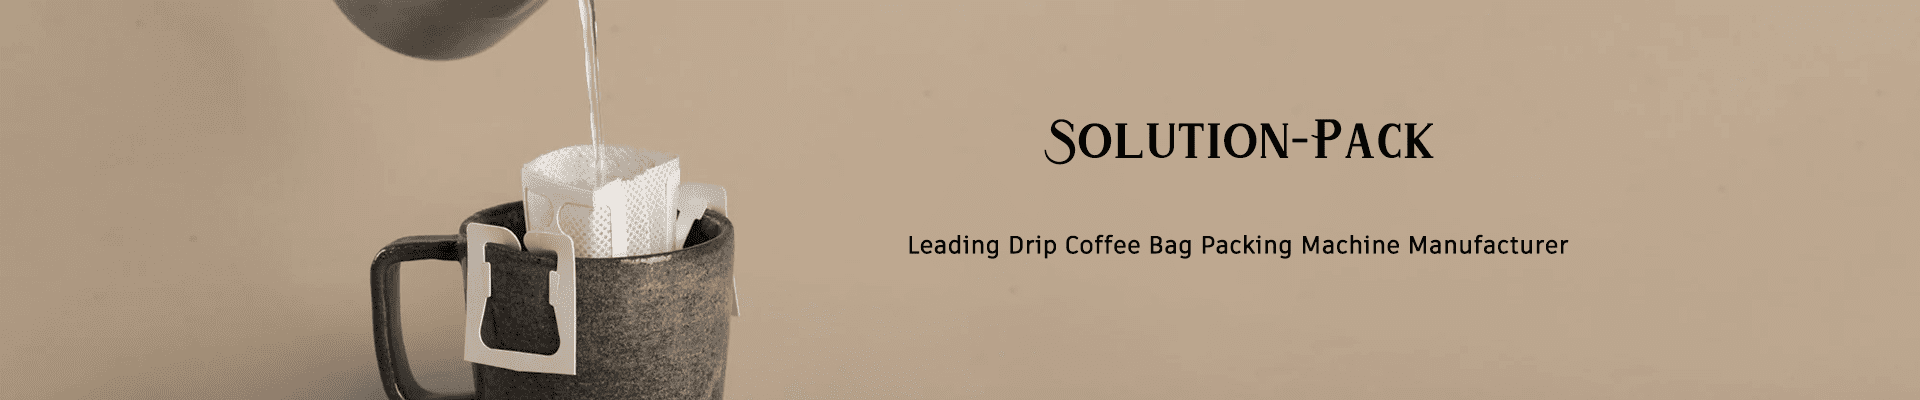 Drip Coffee Bag Packing Machine Manufacturer Solution Pack